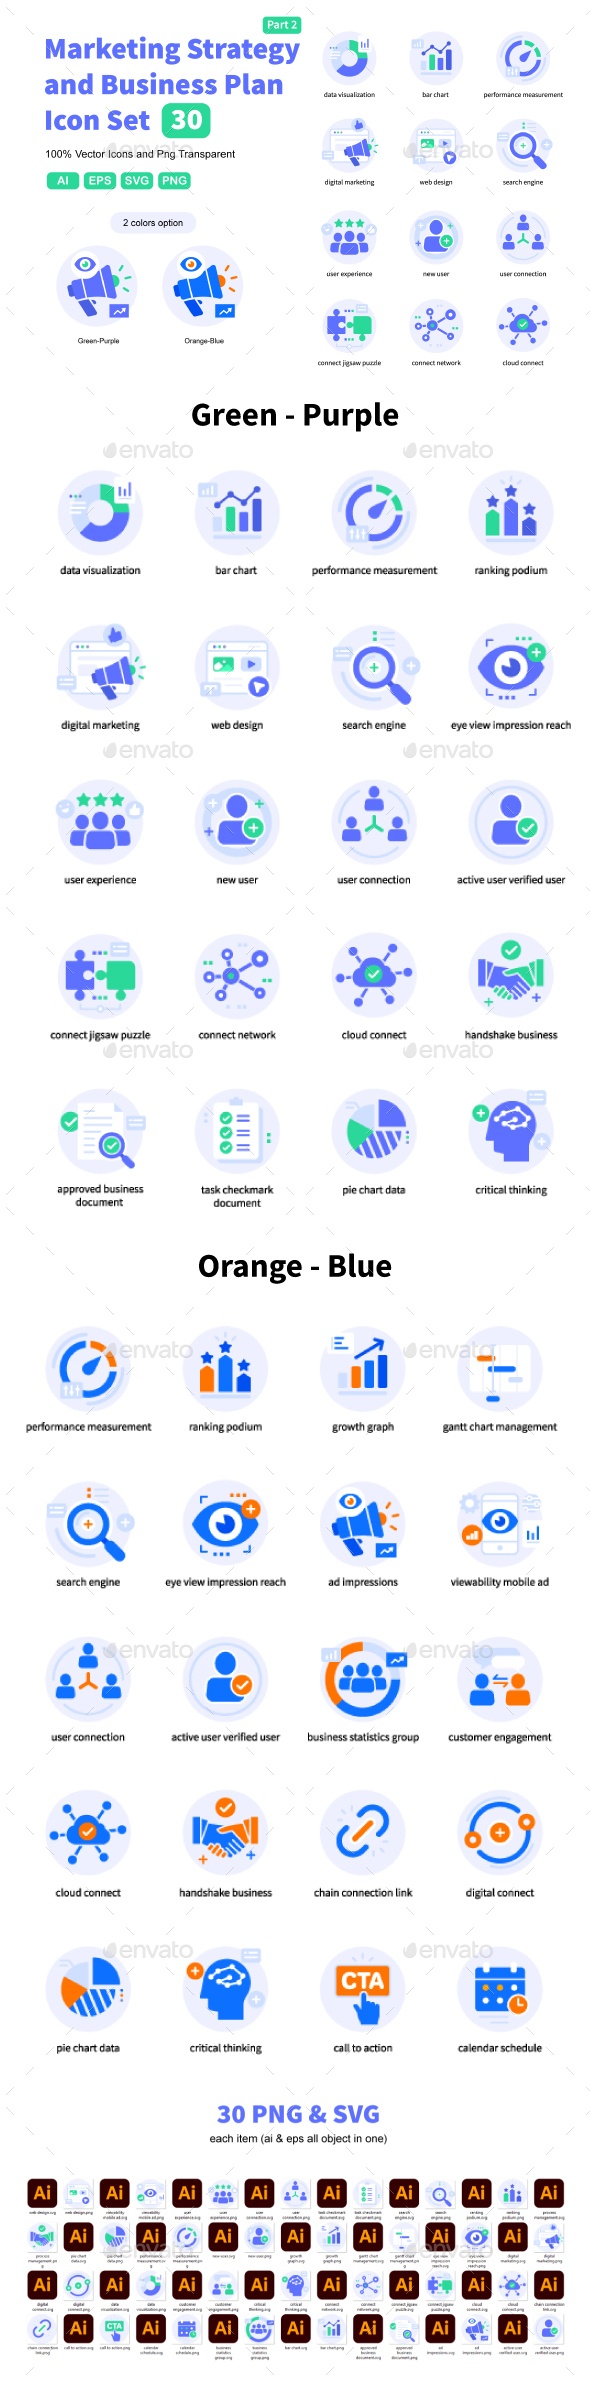 Marketing Strategy and Business Plan Icon Set Part 2